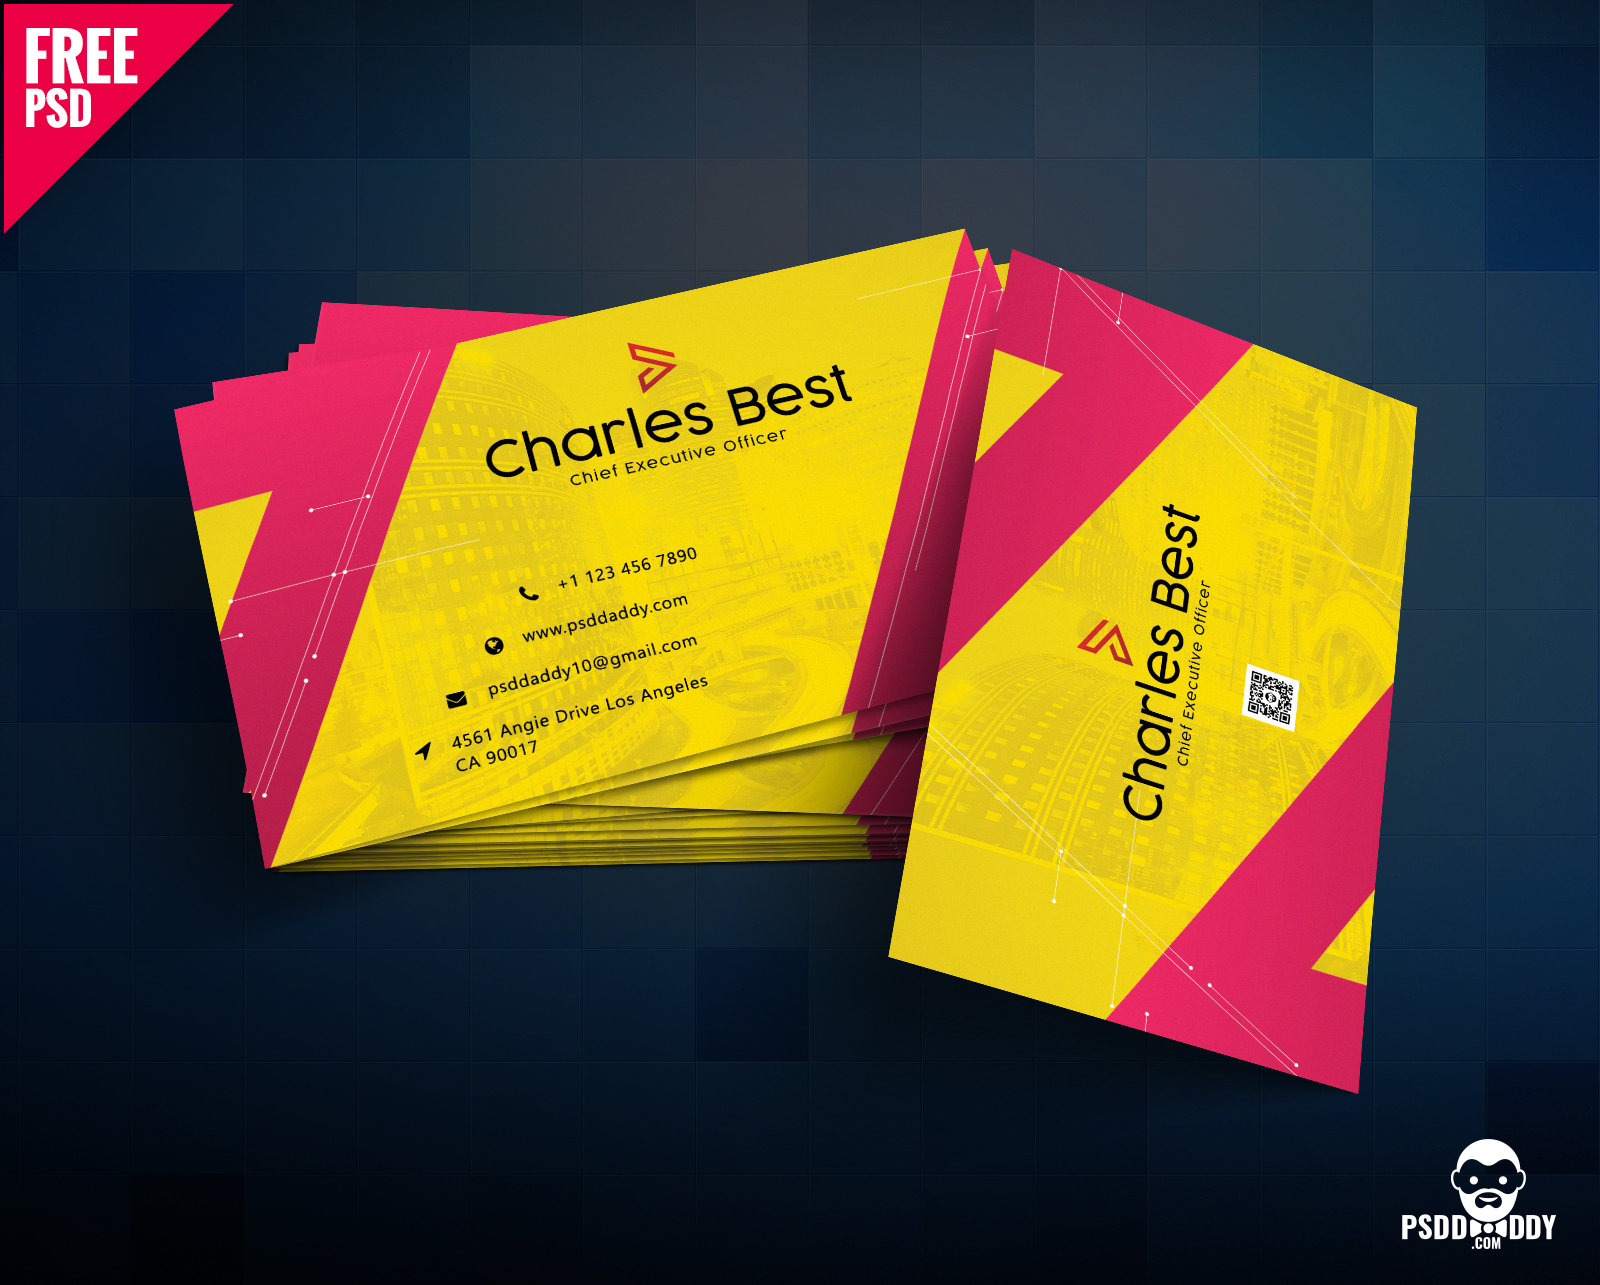 Download] Creative Business Card Free Psd | Psddaddy Within Template Name Card Psd